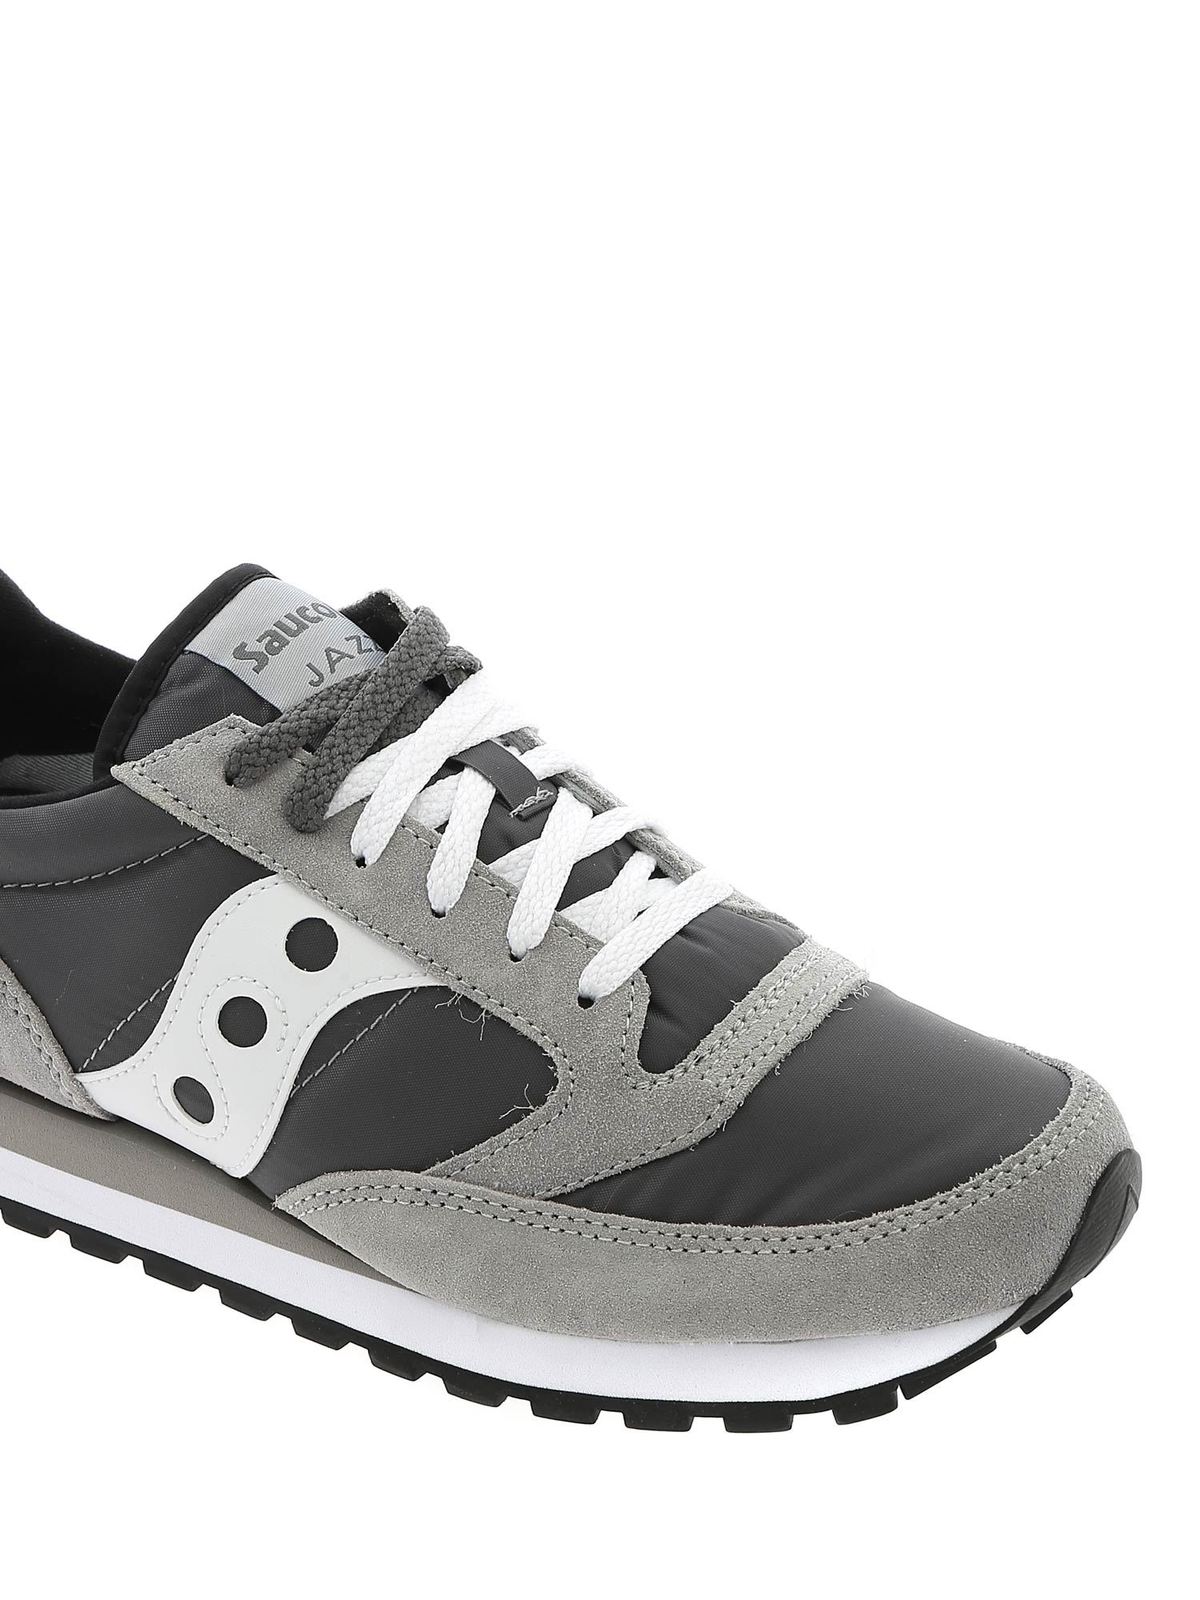 saucony chaussures or